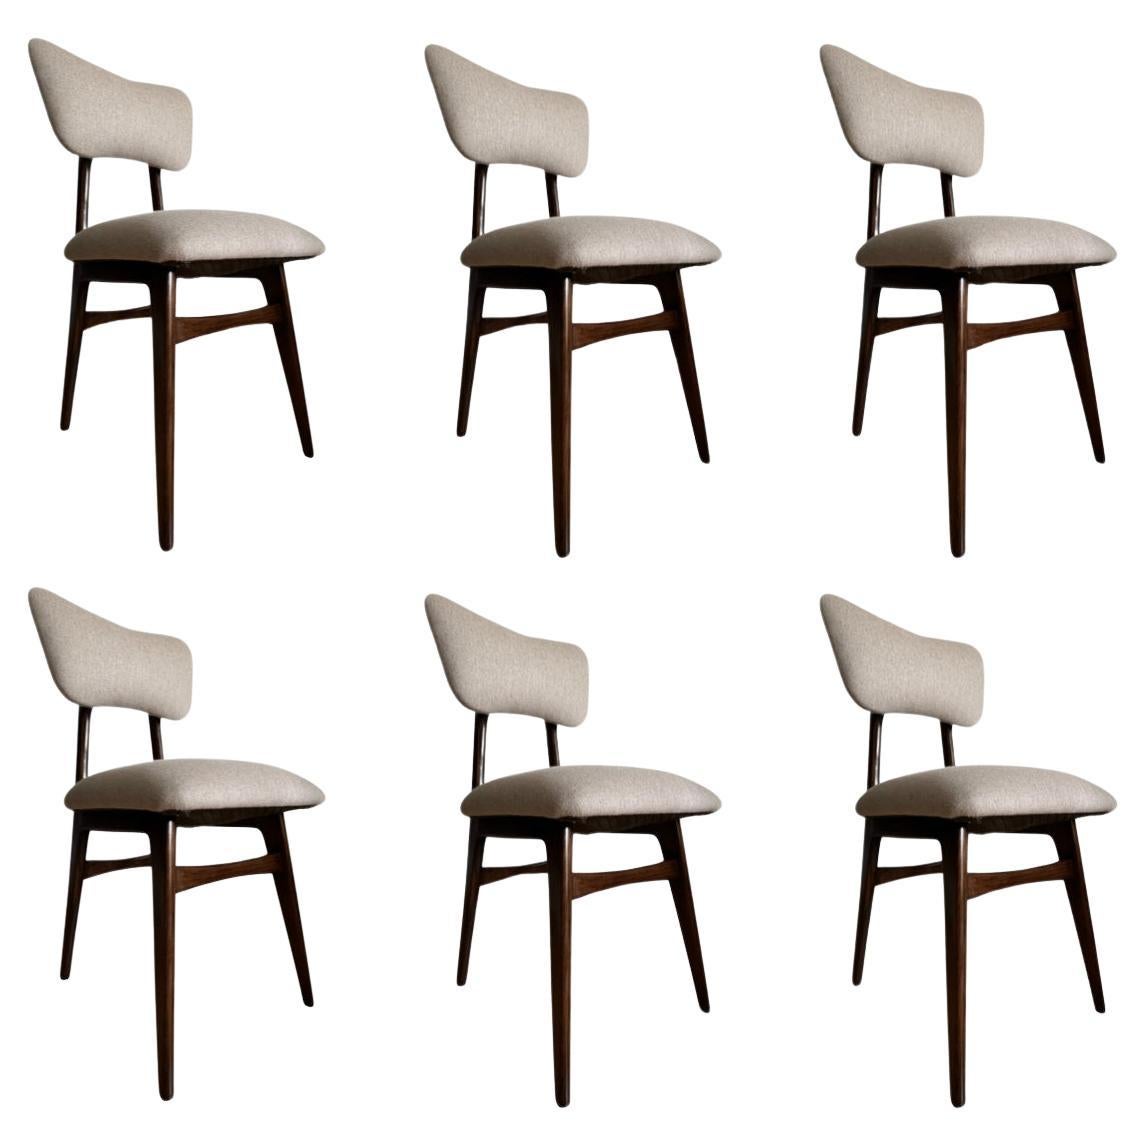 Set of 6 Midcentury Dining Chairs in Beige Wool Upholstery, Poland, 1960s For Sale